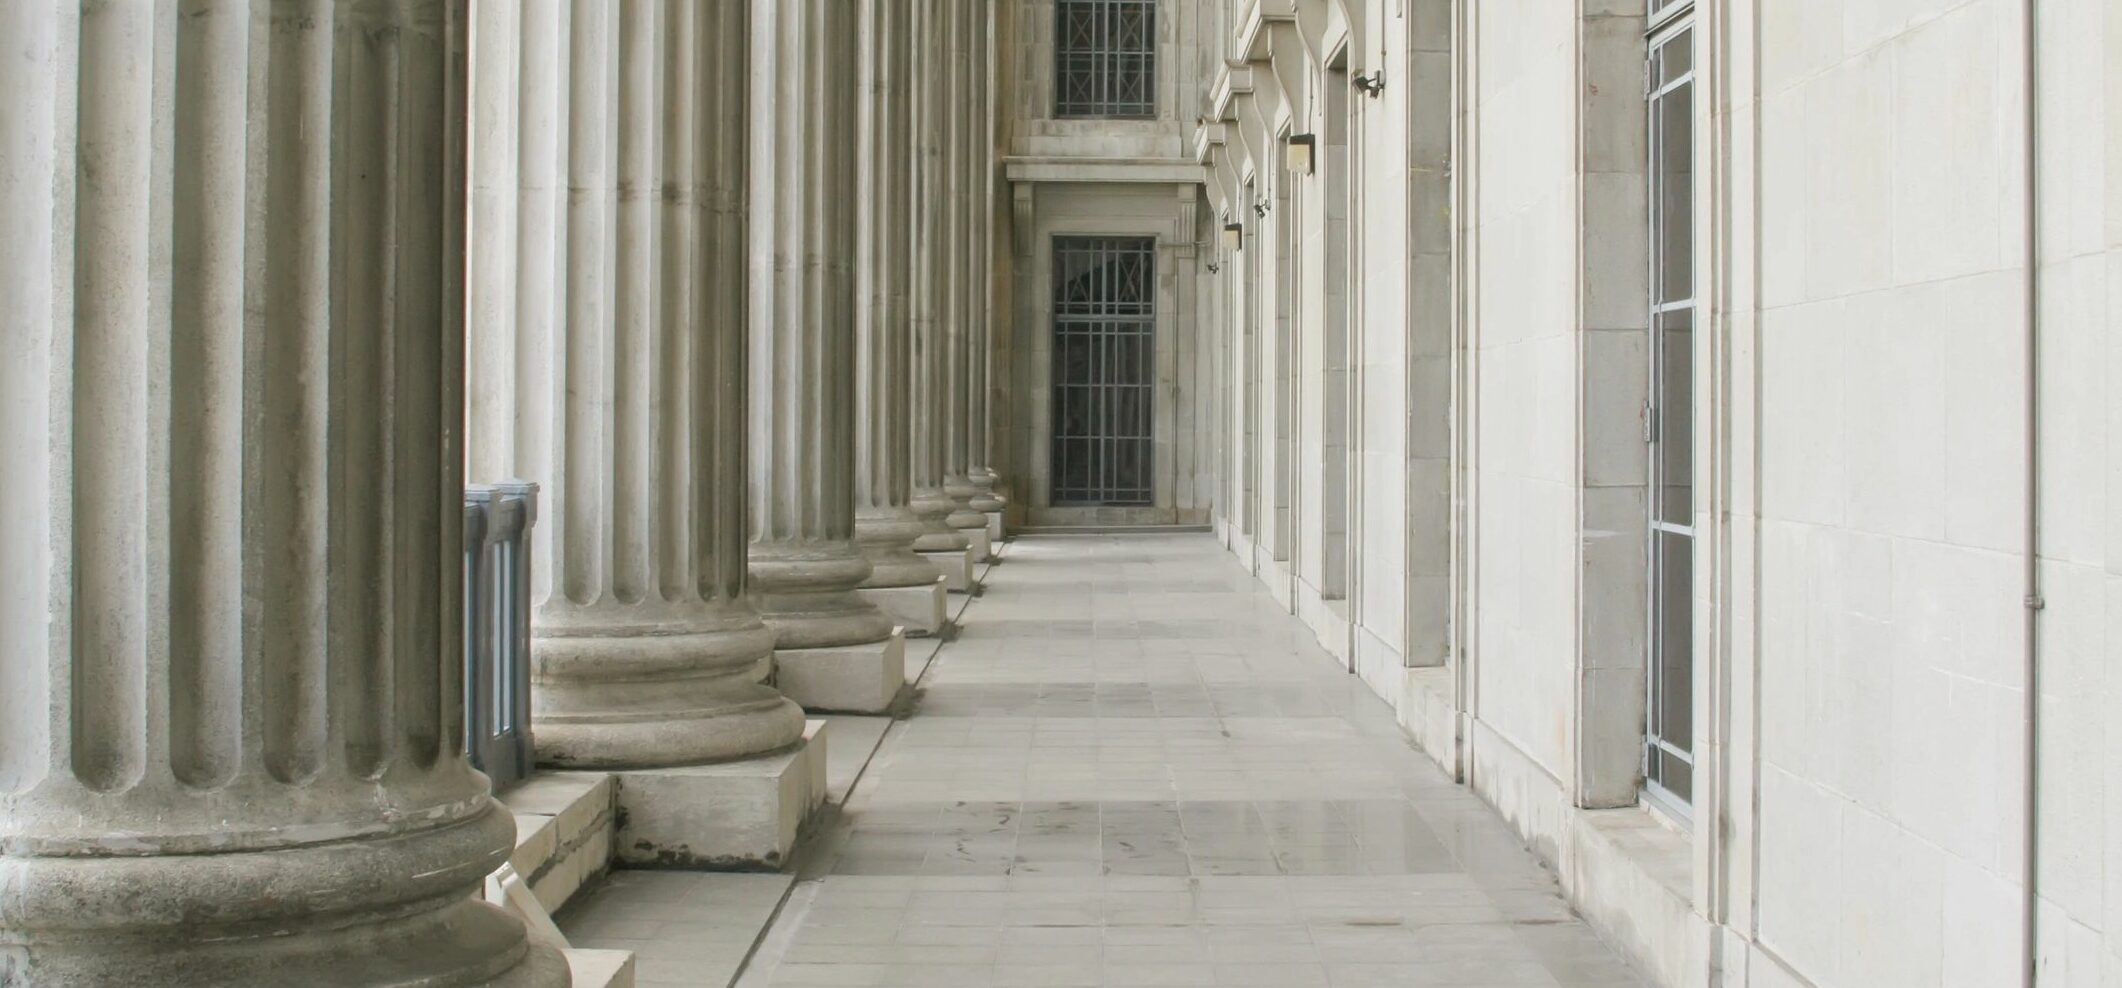 image of stately columns and windows on a government building